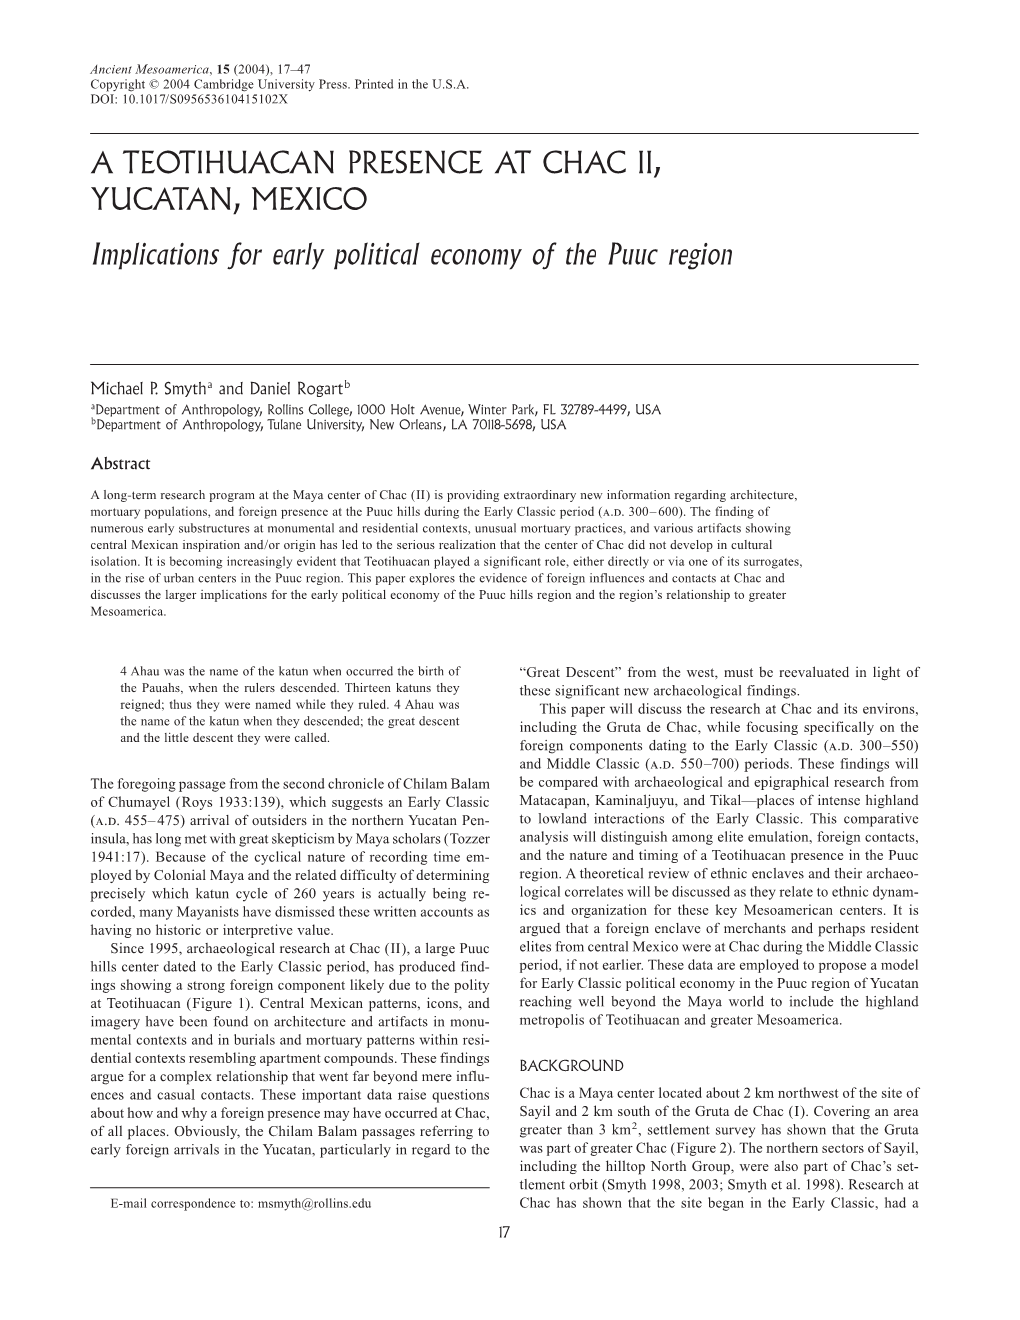 A TEOTIHUACAN PRESENCE at CHAC II, YUCATAN, MEXICO Implications for Early Political Economy of the Puuc Region